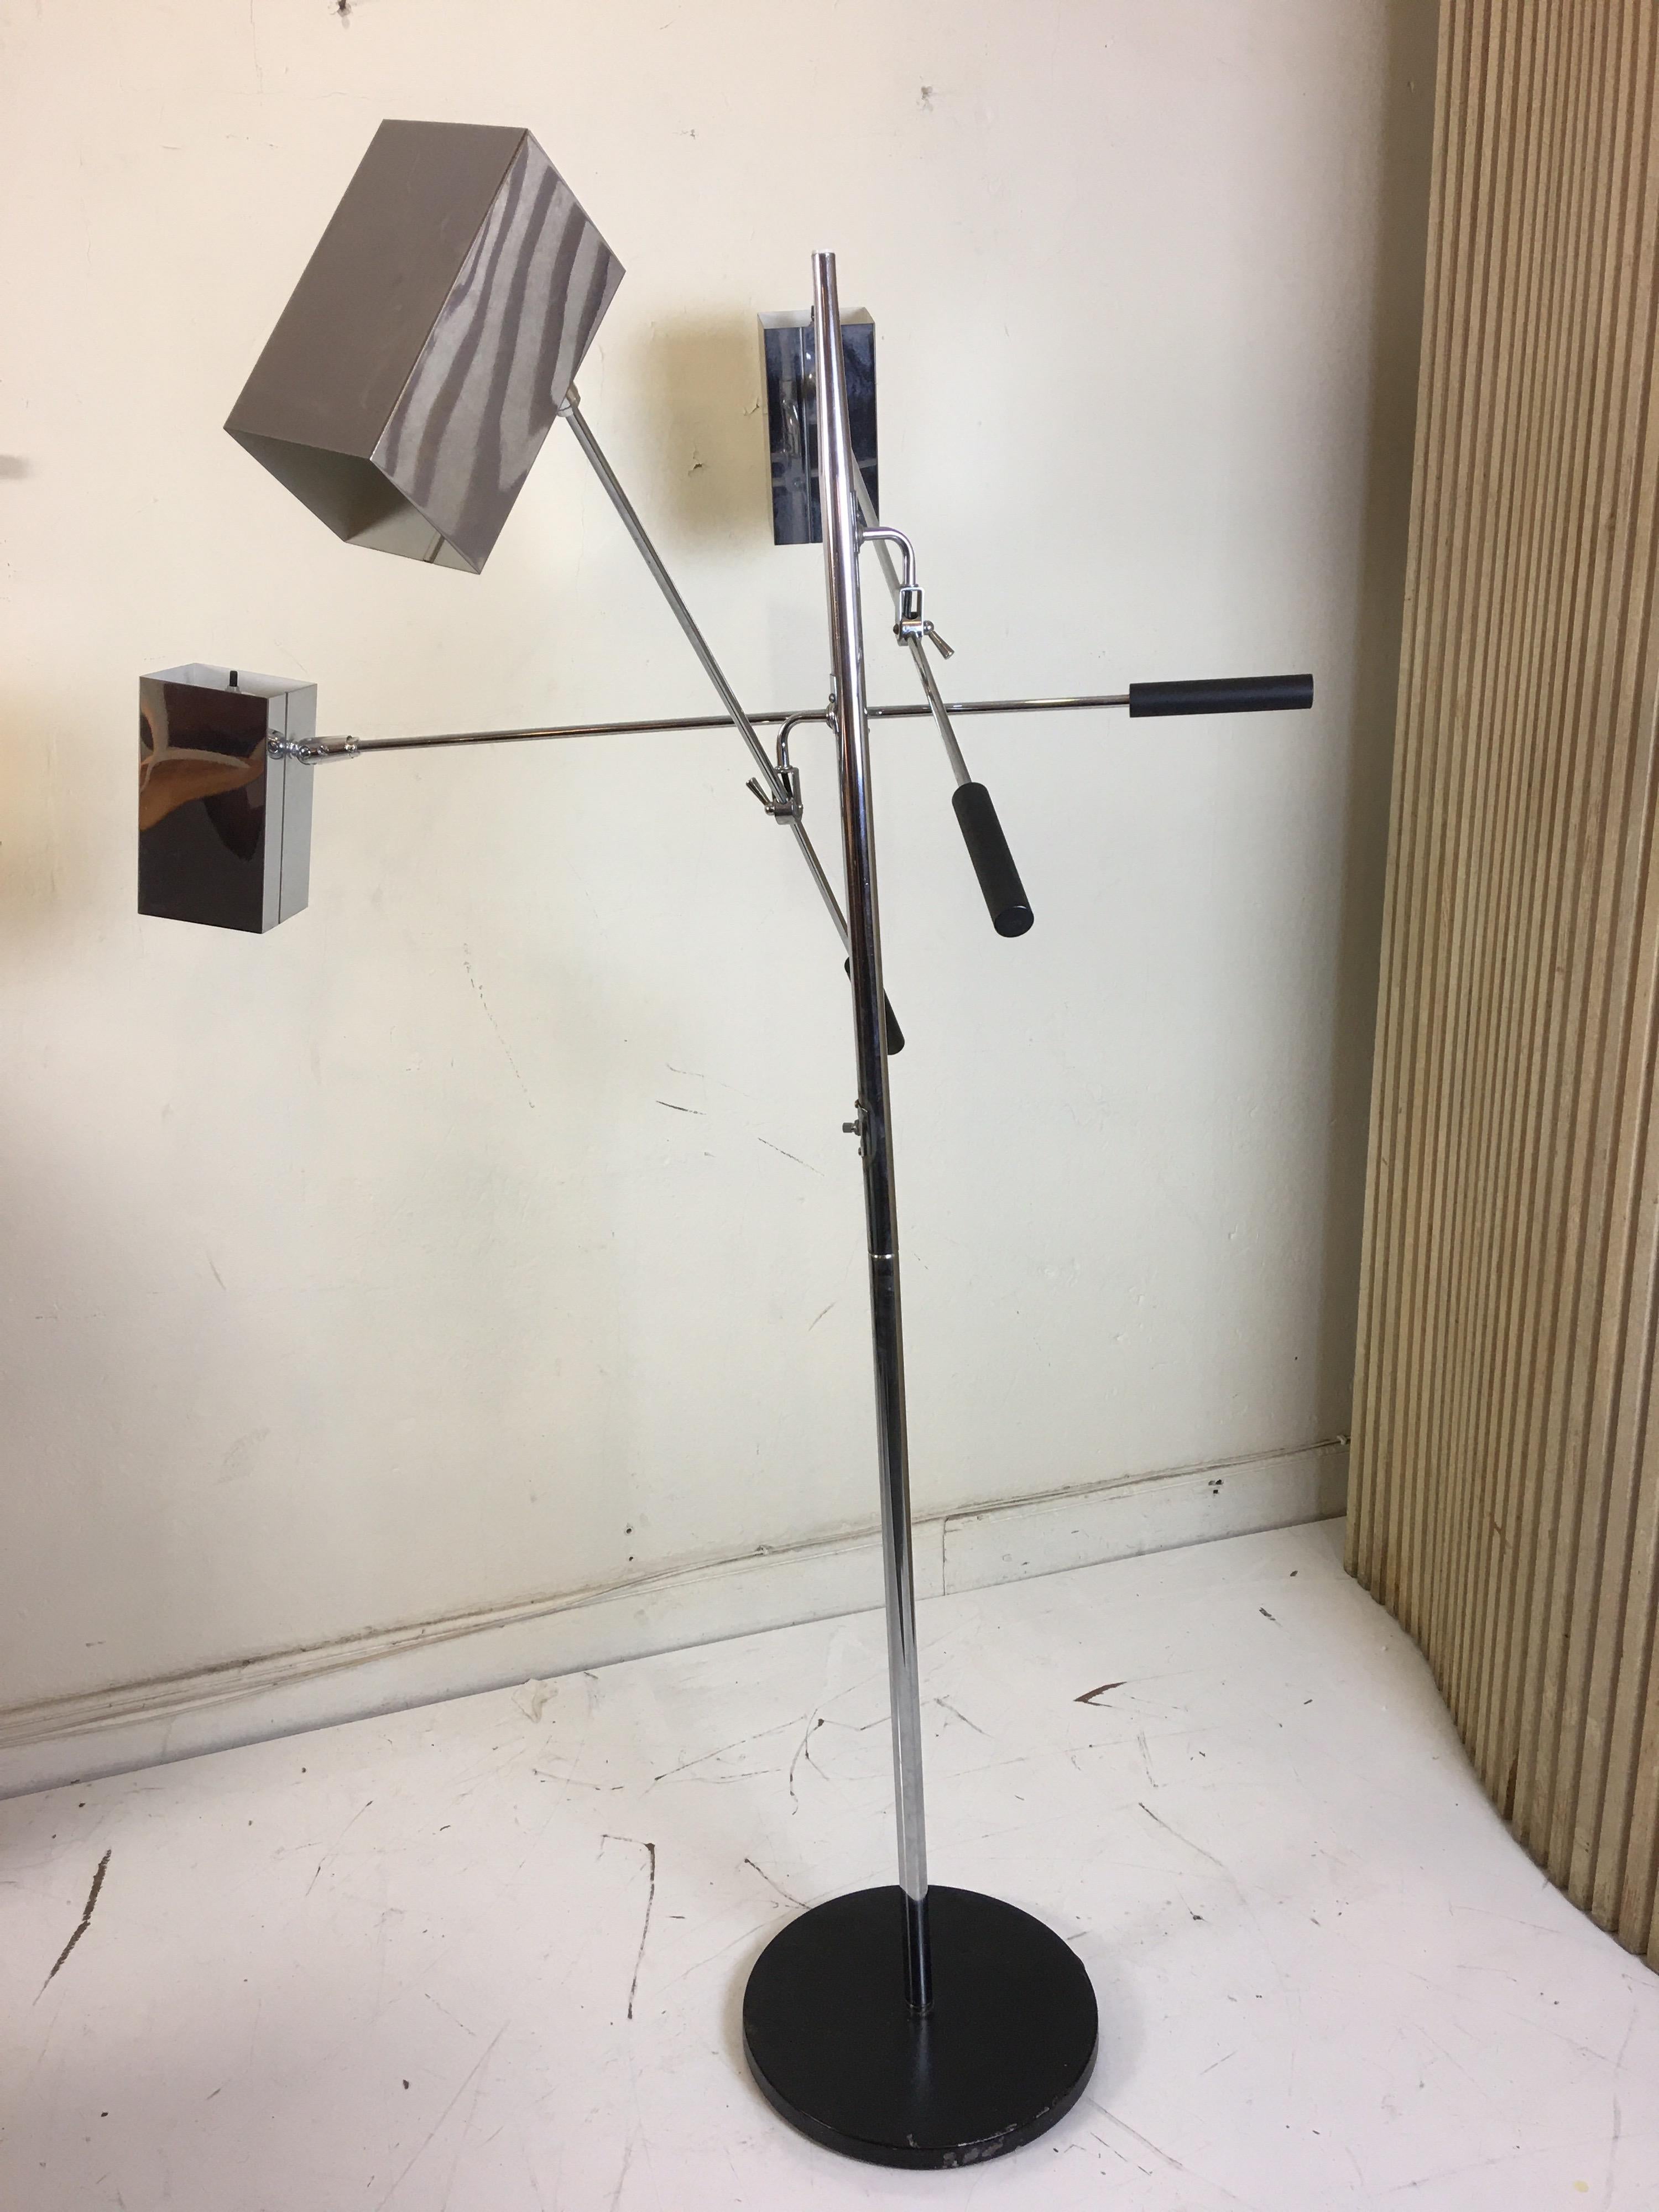 Sonneman lighting 3-arm floor lamp. Adjustable and movable square chrome shades with switches on shades and on pole. Late 1960s, early 1970s design. Each arm has a tightening mechanism which allows shades to be placed in multiple positions.